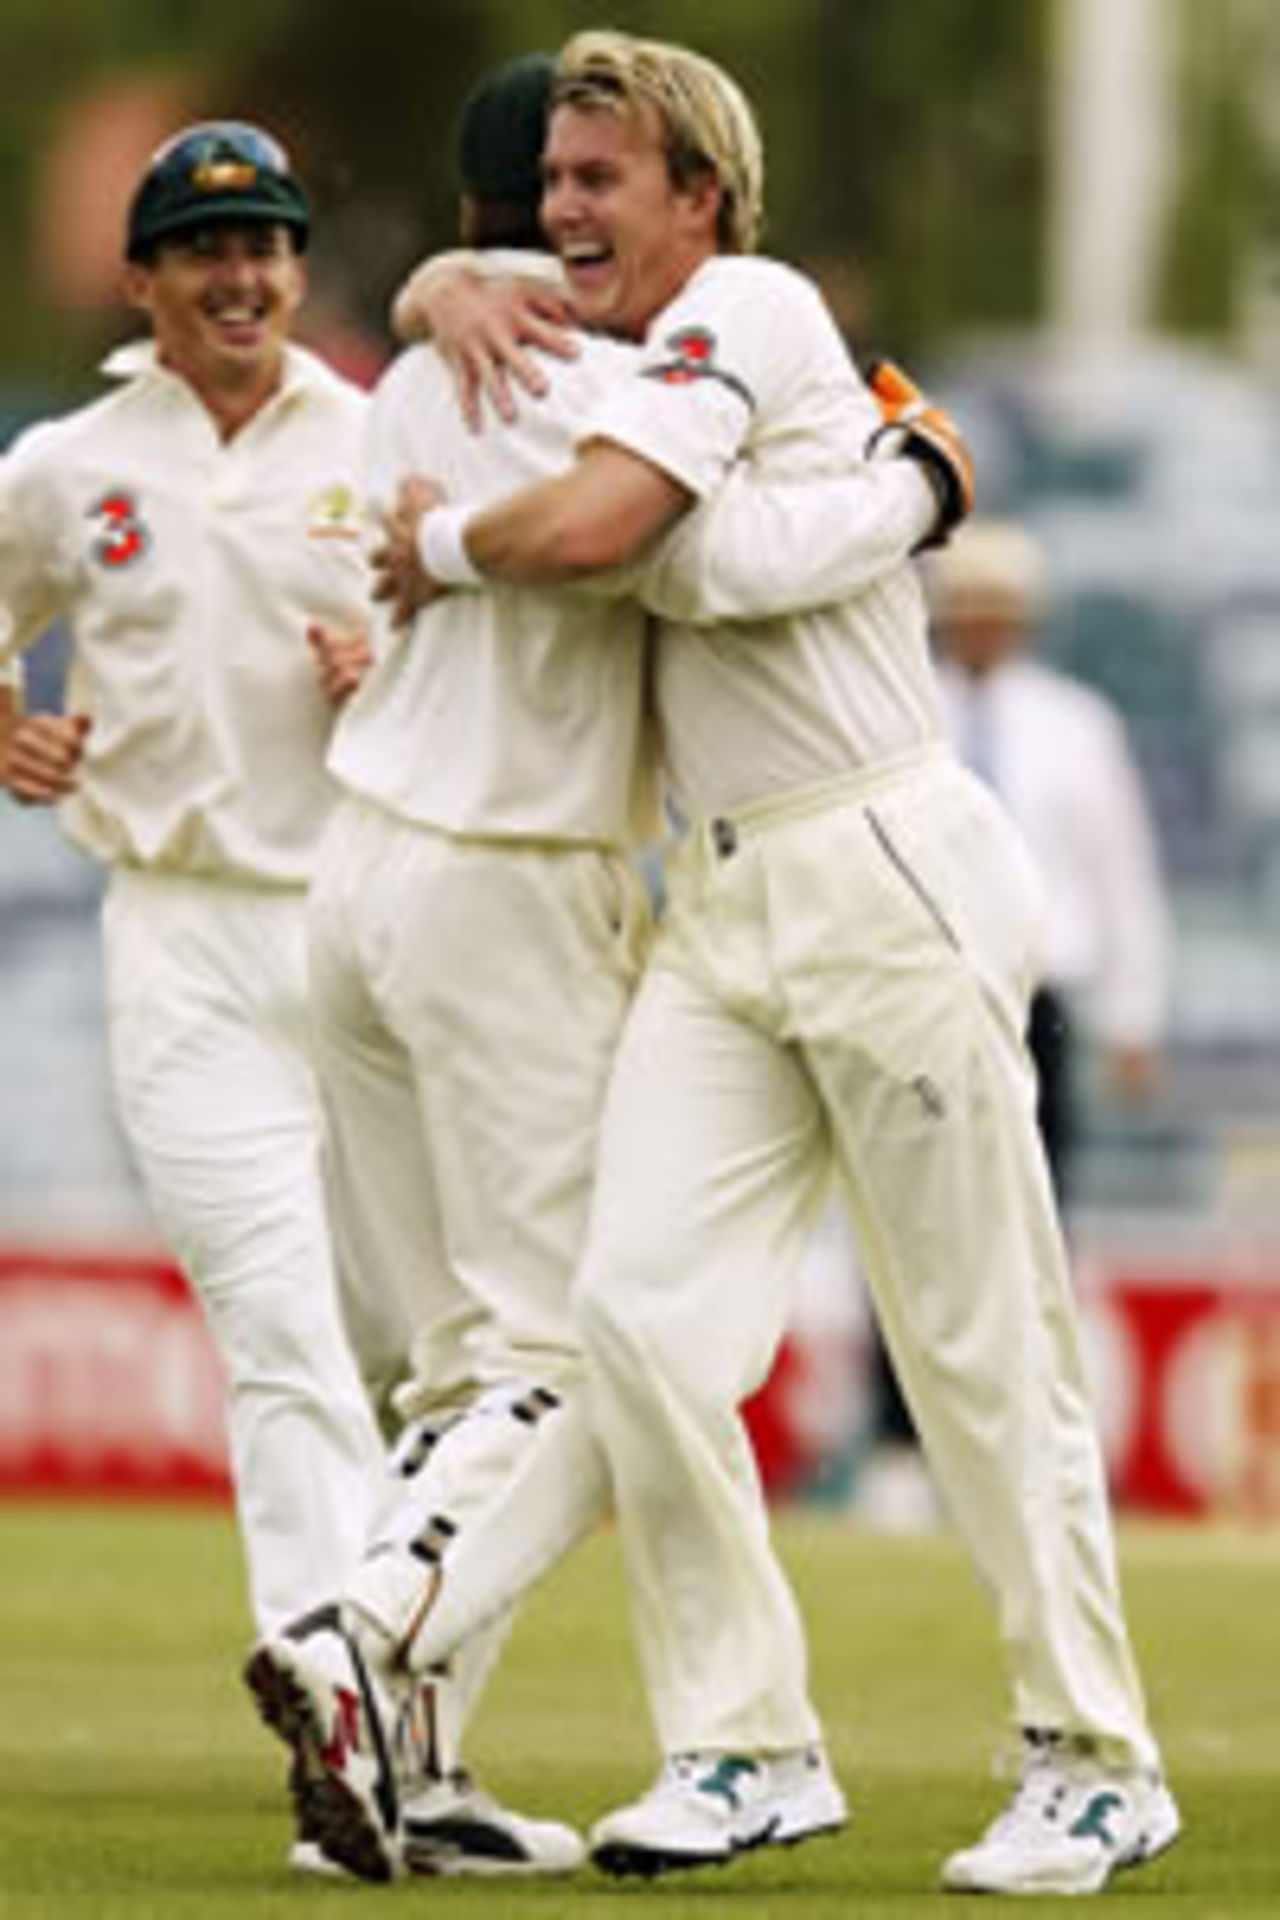 Brett Lee of Australia celebrates the wicket of Mark Vermeulen of Zimbabwe during day four of the First Test between Australia and Zimbabwe played at the WACA Ground on October 12, 2003 in Perth, Australia.